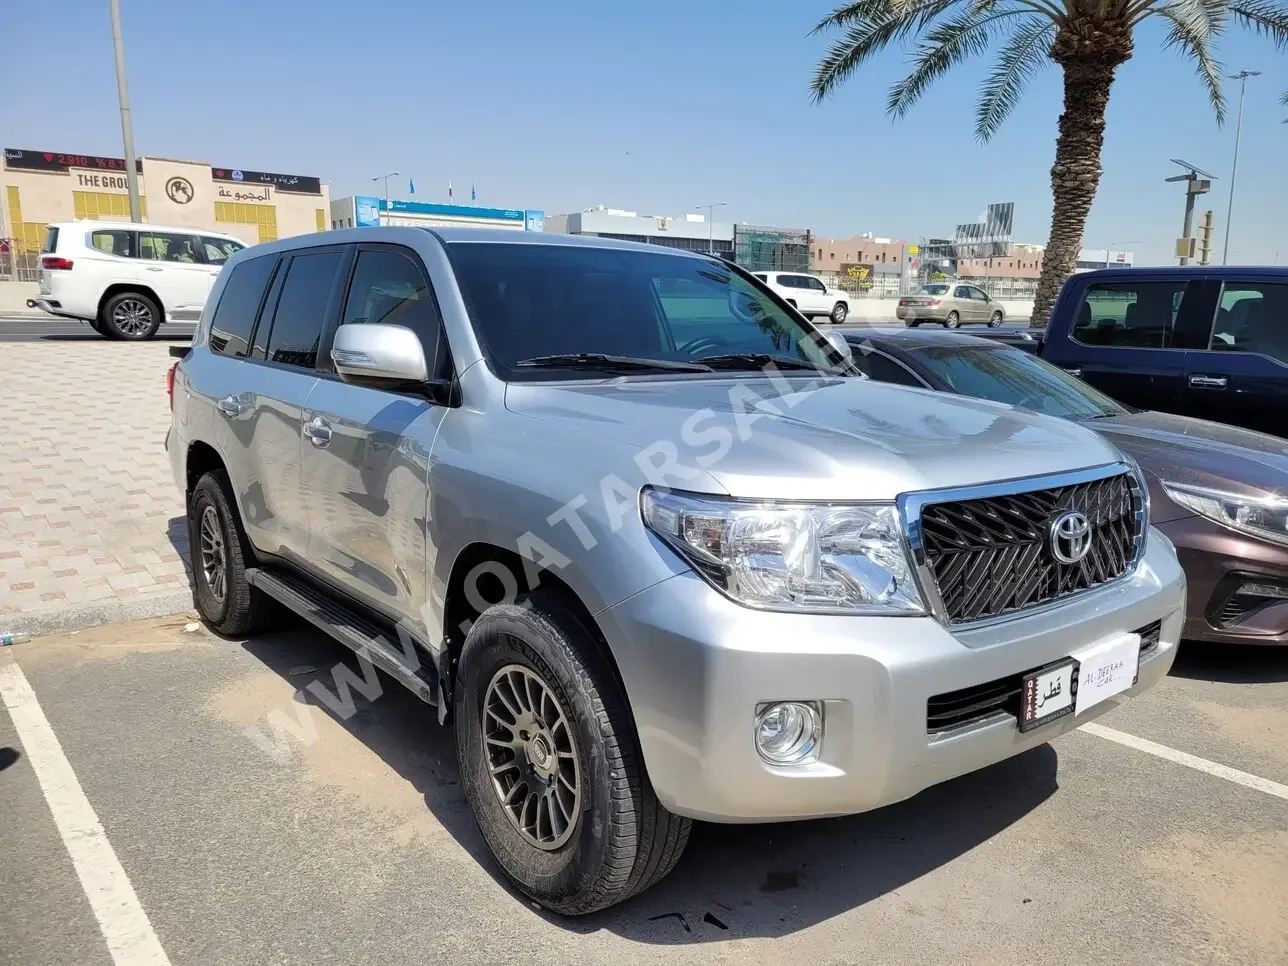 Toyota  Land Cruiser  G  2011  Automatic  17,000 Km  6 Cylinder  Four Wheel Drive (4WD)  SUV  Silver